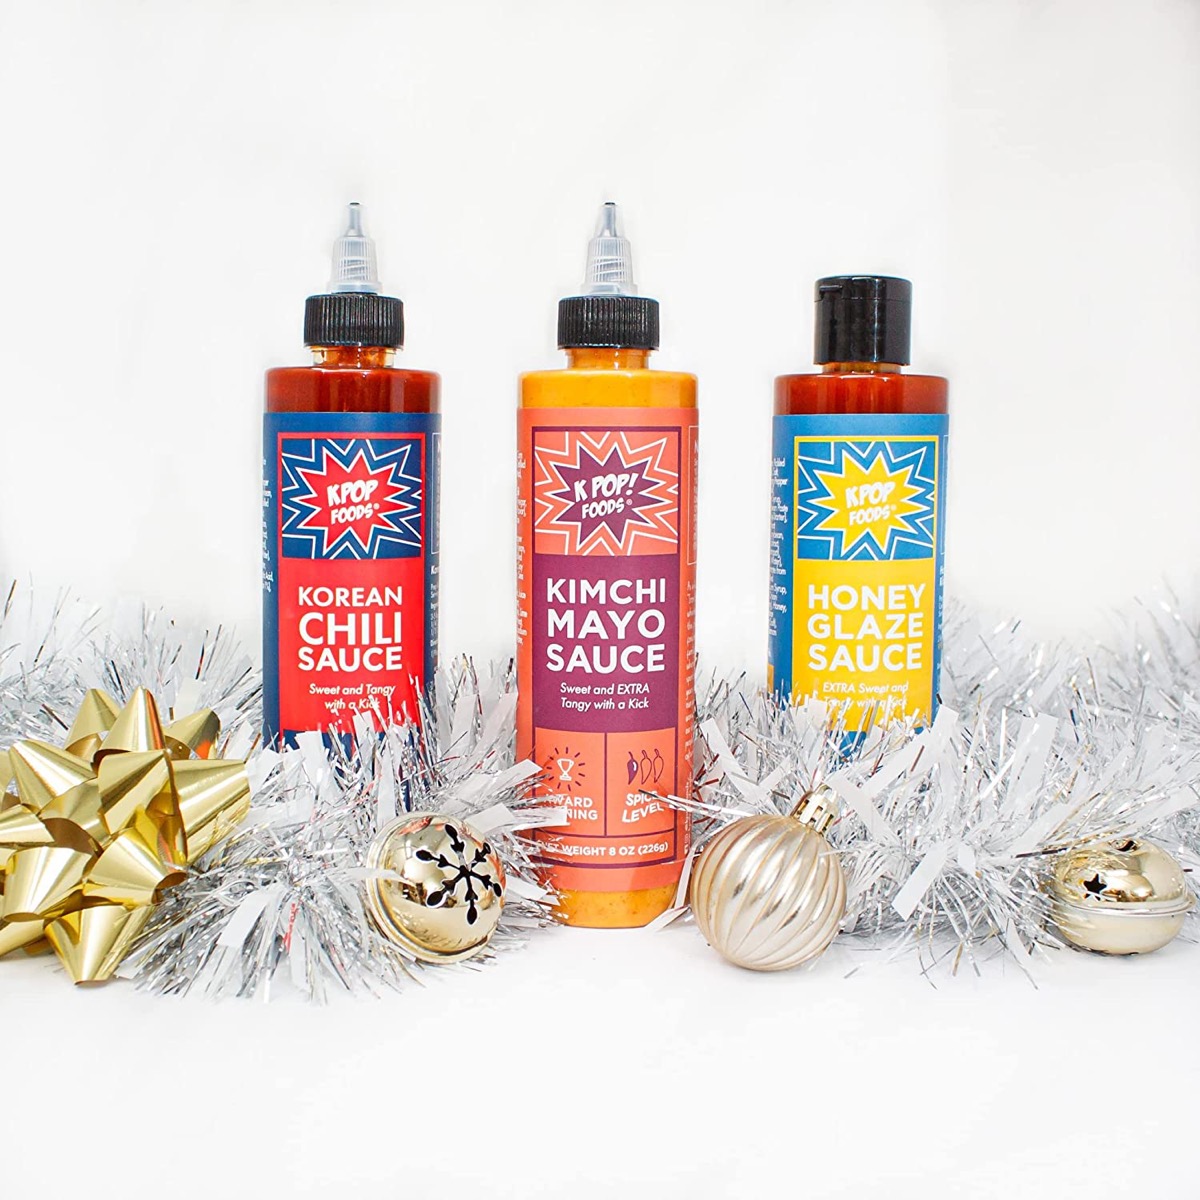 Kpop sauce set with holiday decorations